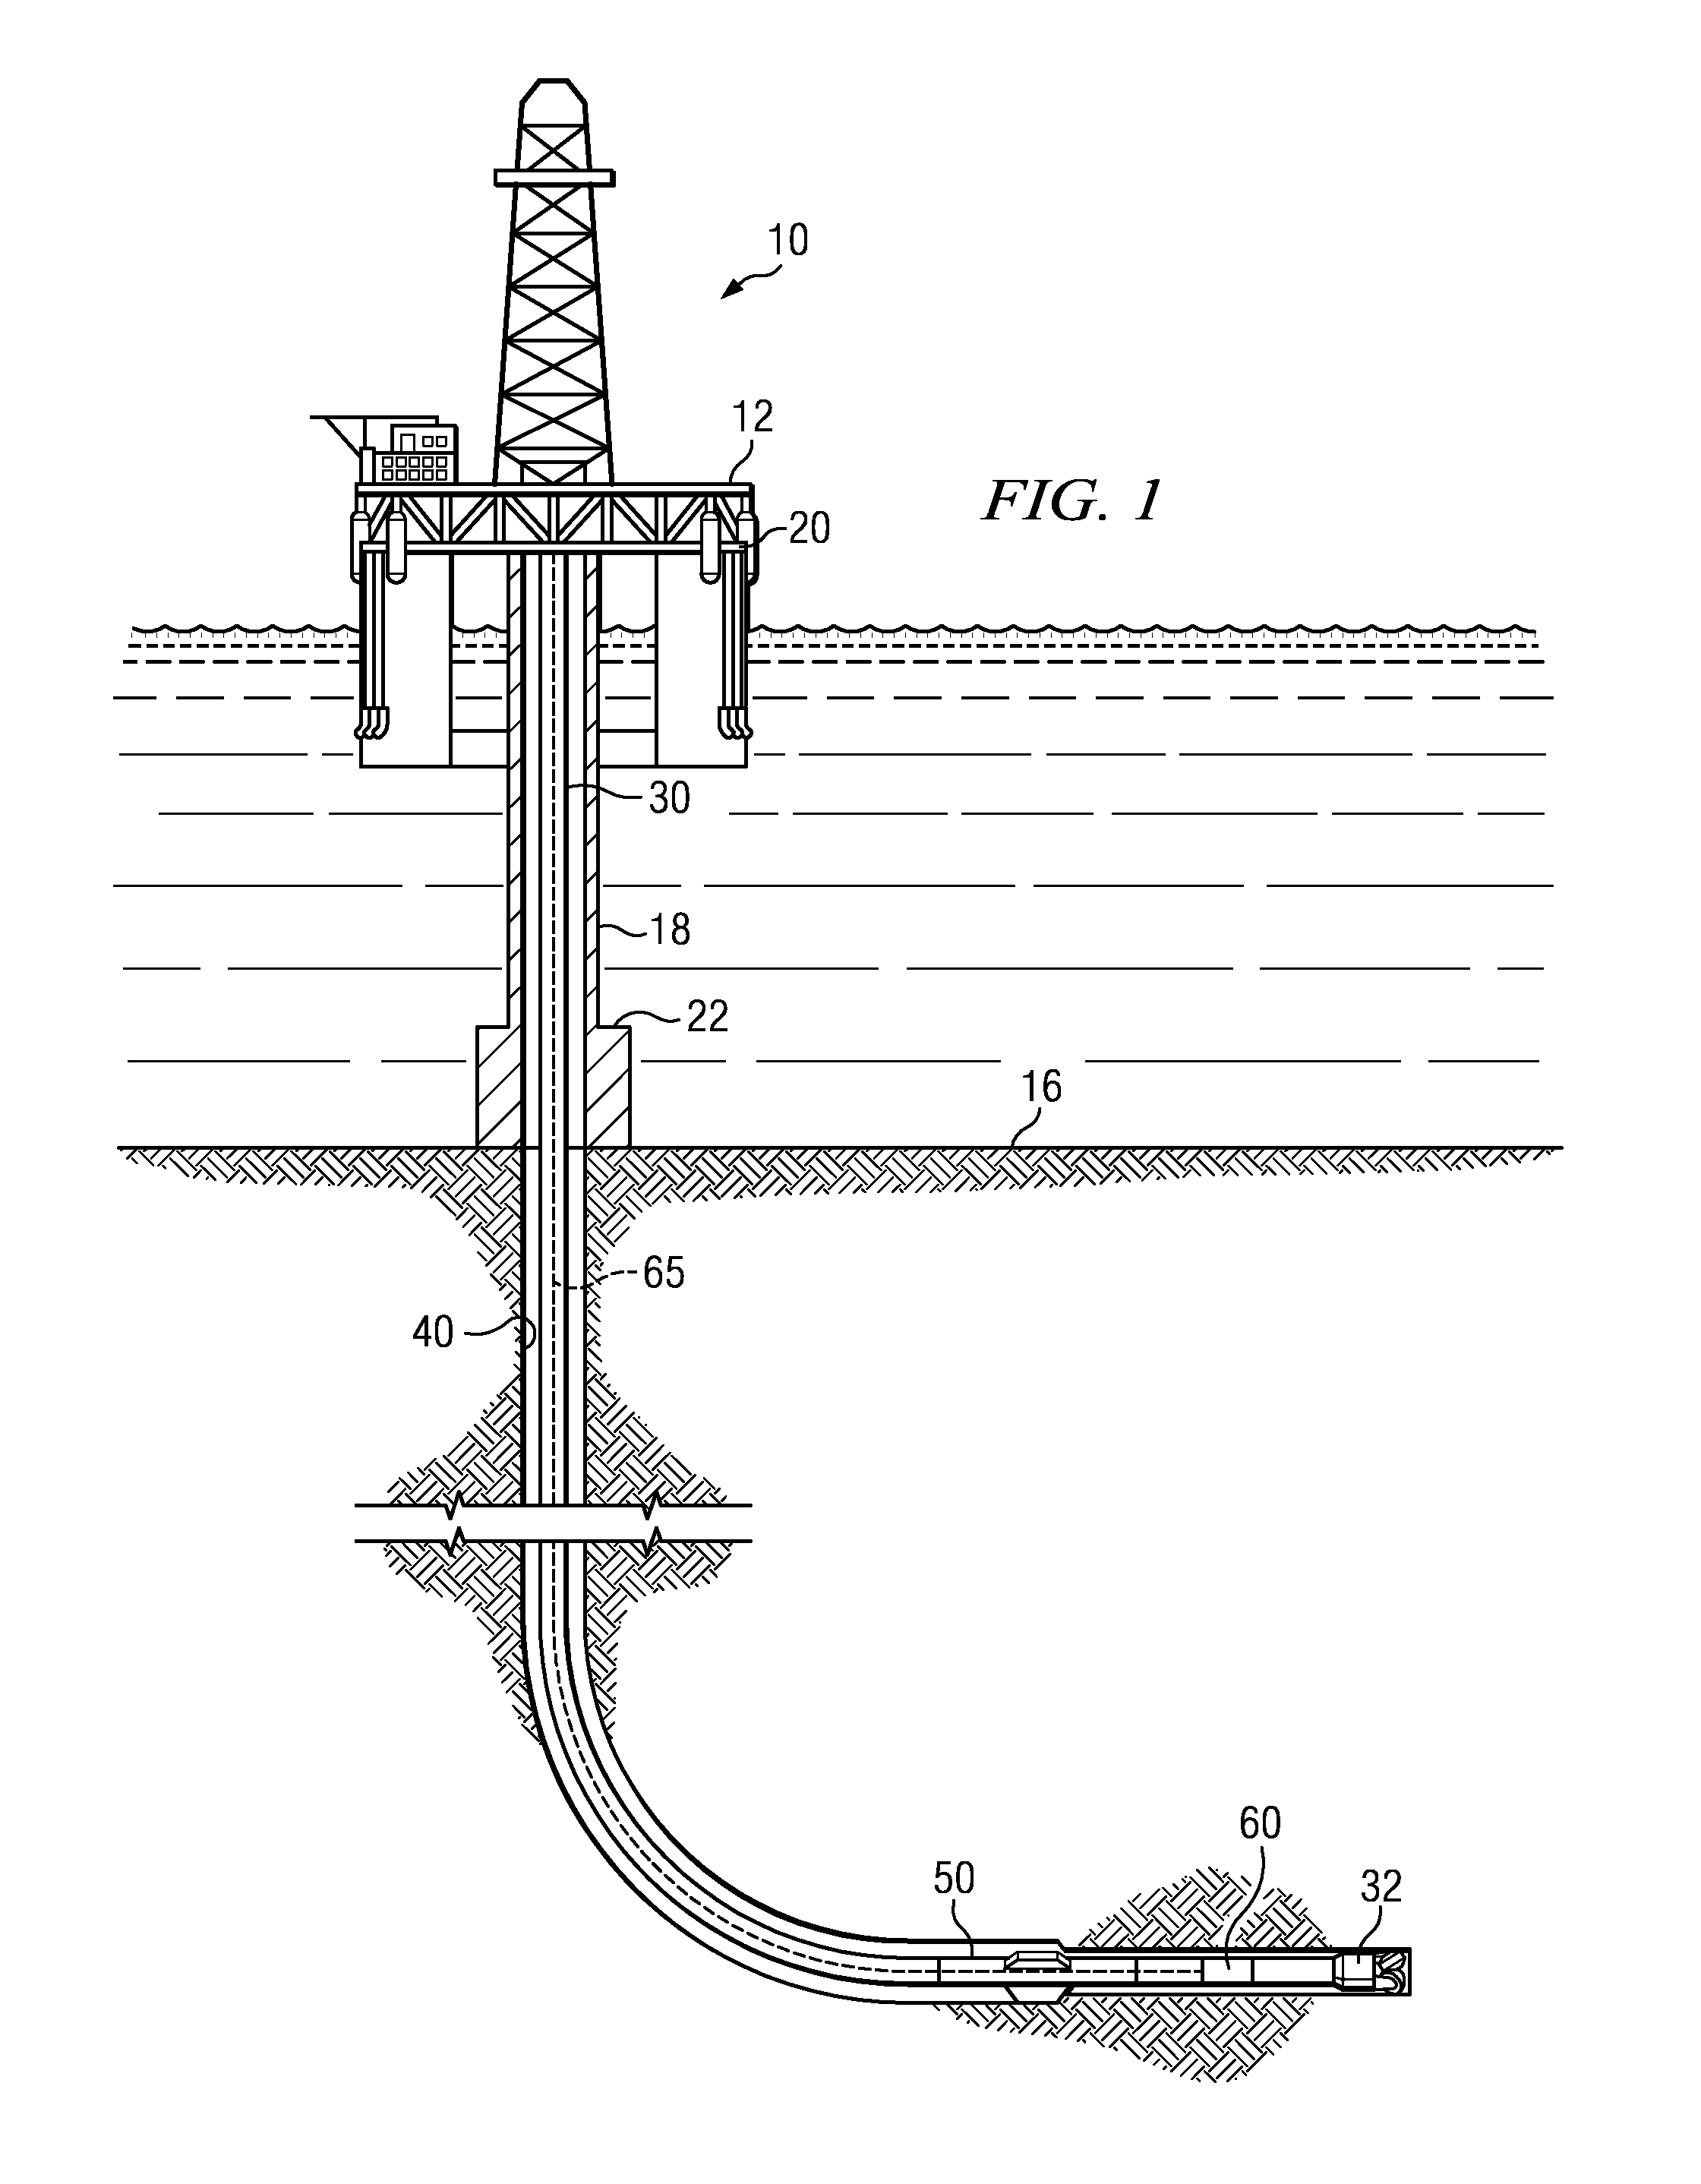 Article of manufacture having a sub-surface friction stir welded channel